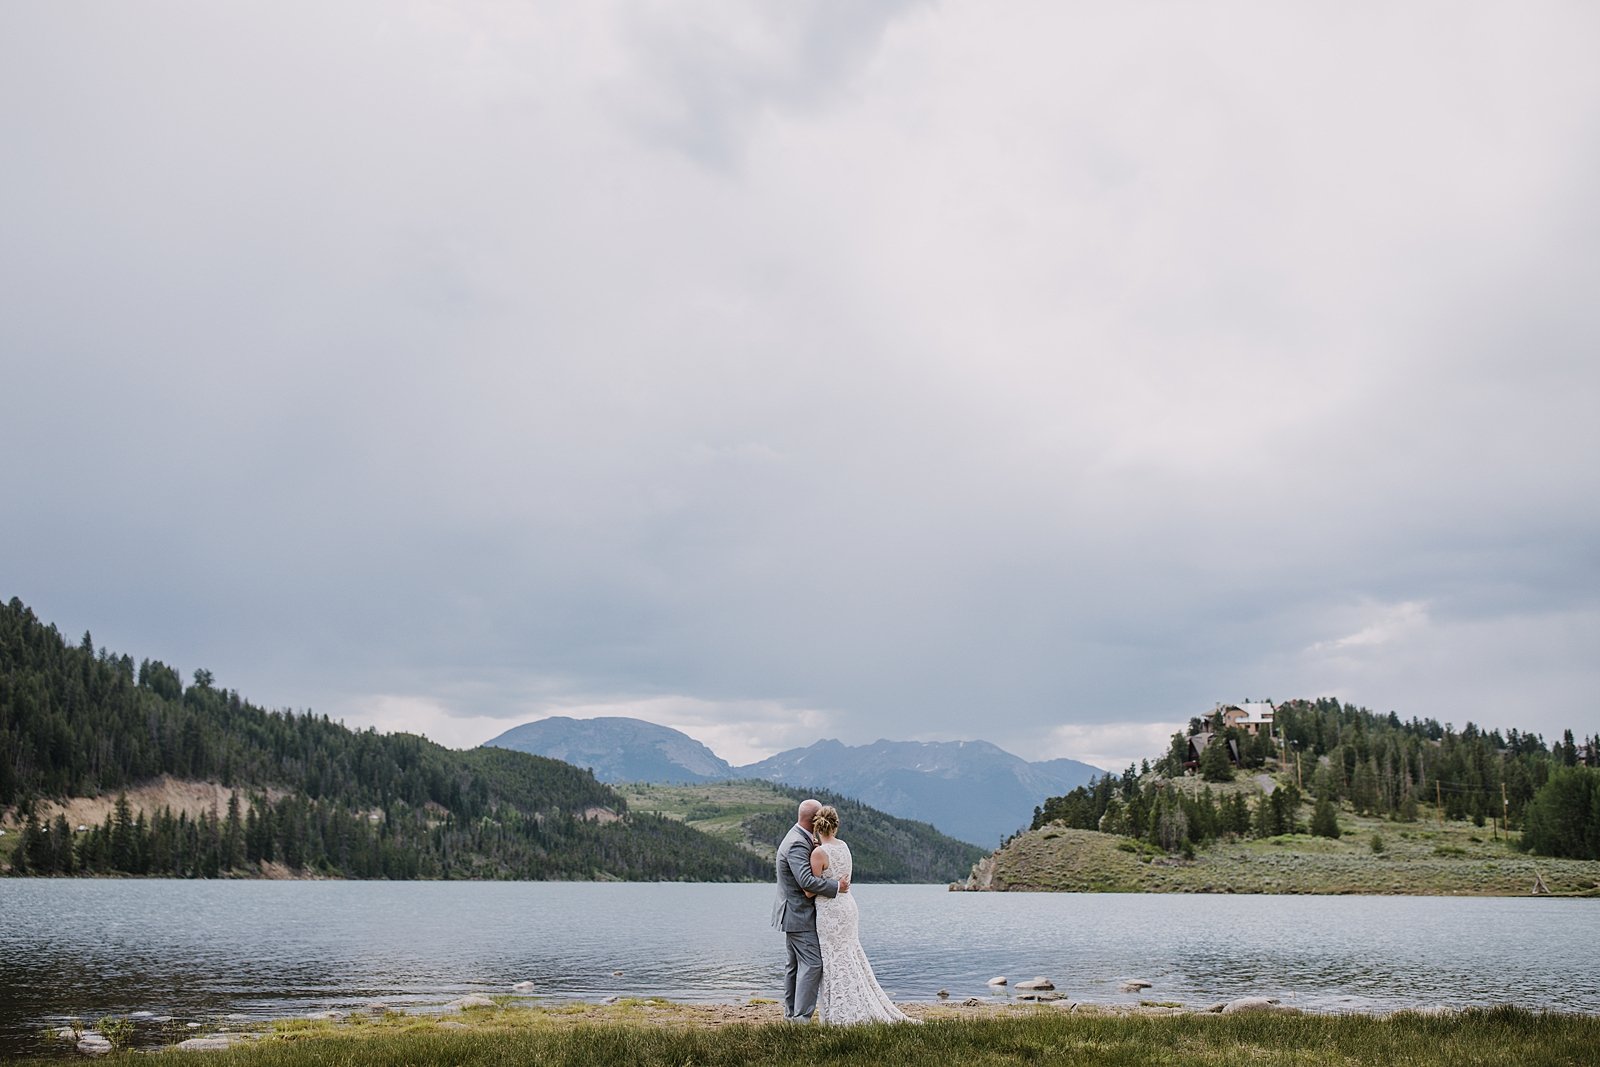 bride and groom in front of the gore range mountains, colorado lakeside wedding, ten mile range wedding, gore range wedding, bhldn wedding dress, gray grooms suit, ten mile range wedding photographer